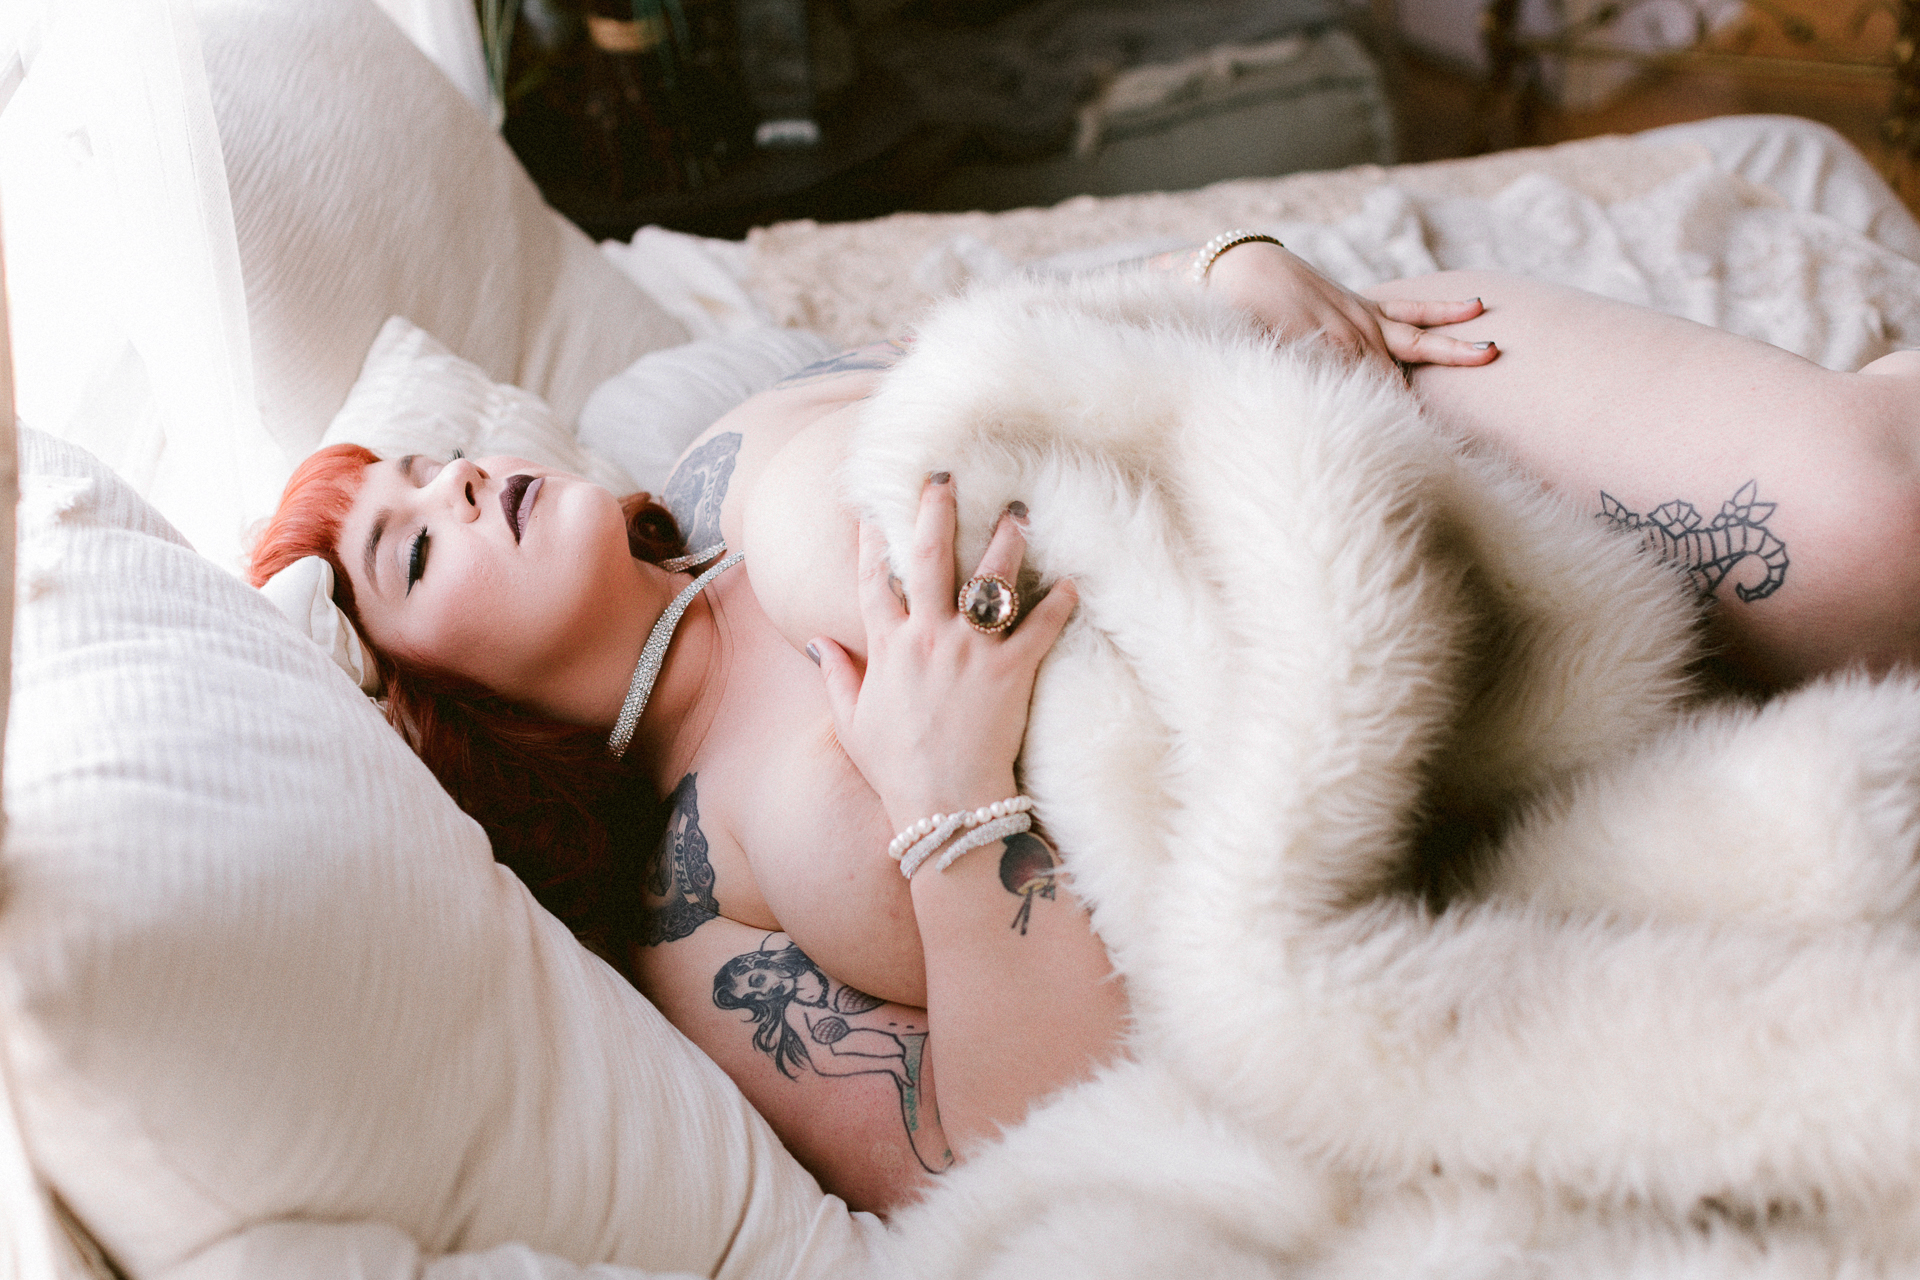 Plus size boudoir photography in the san francisco bay area